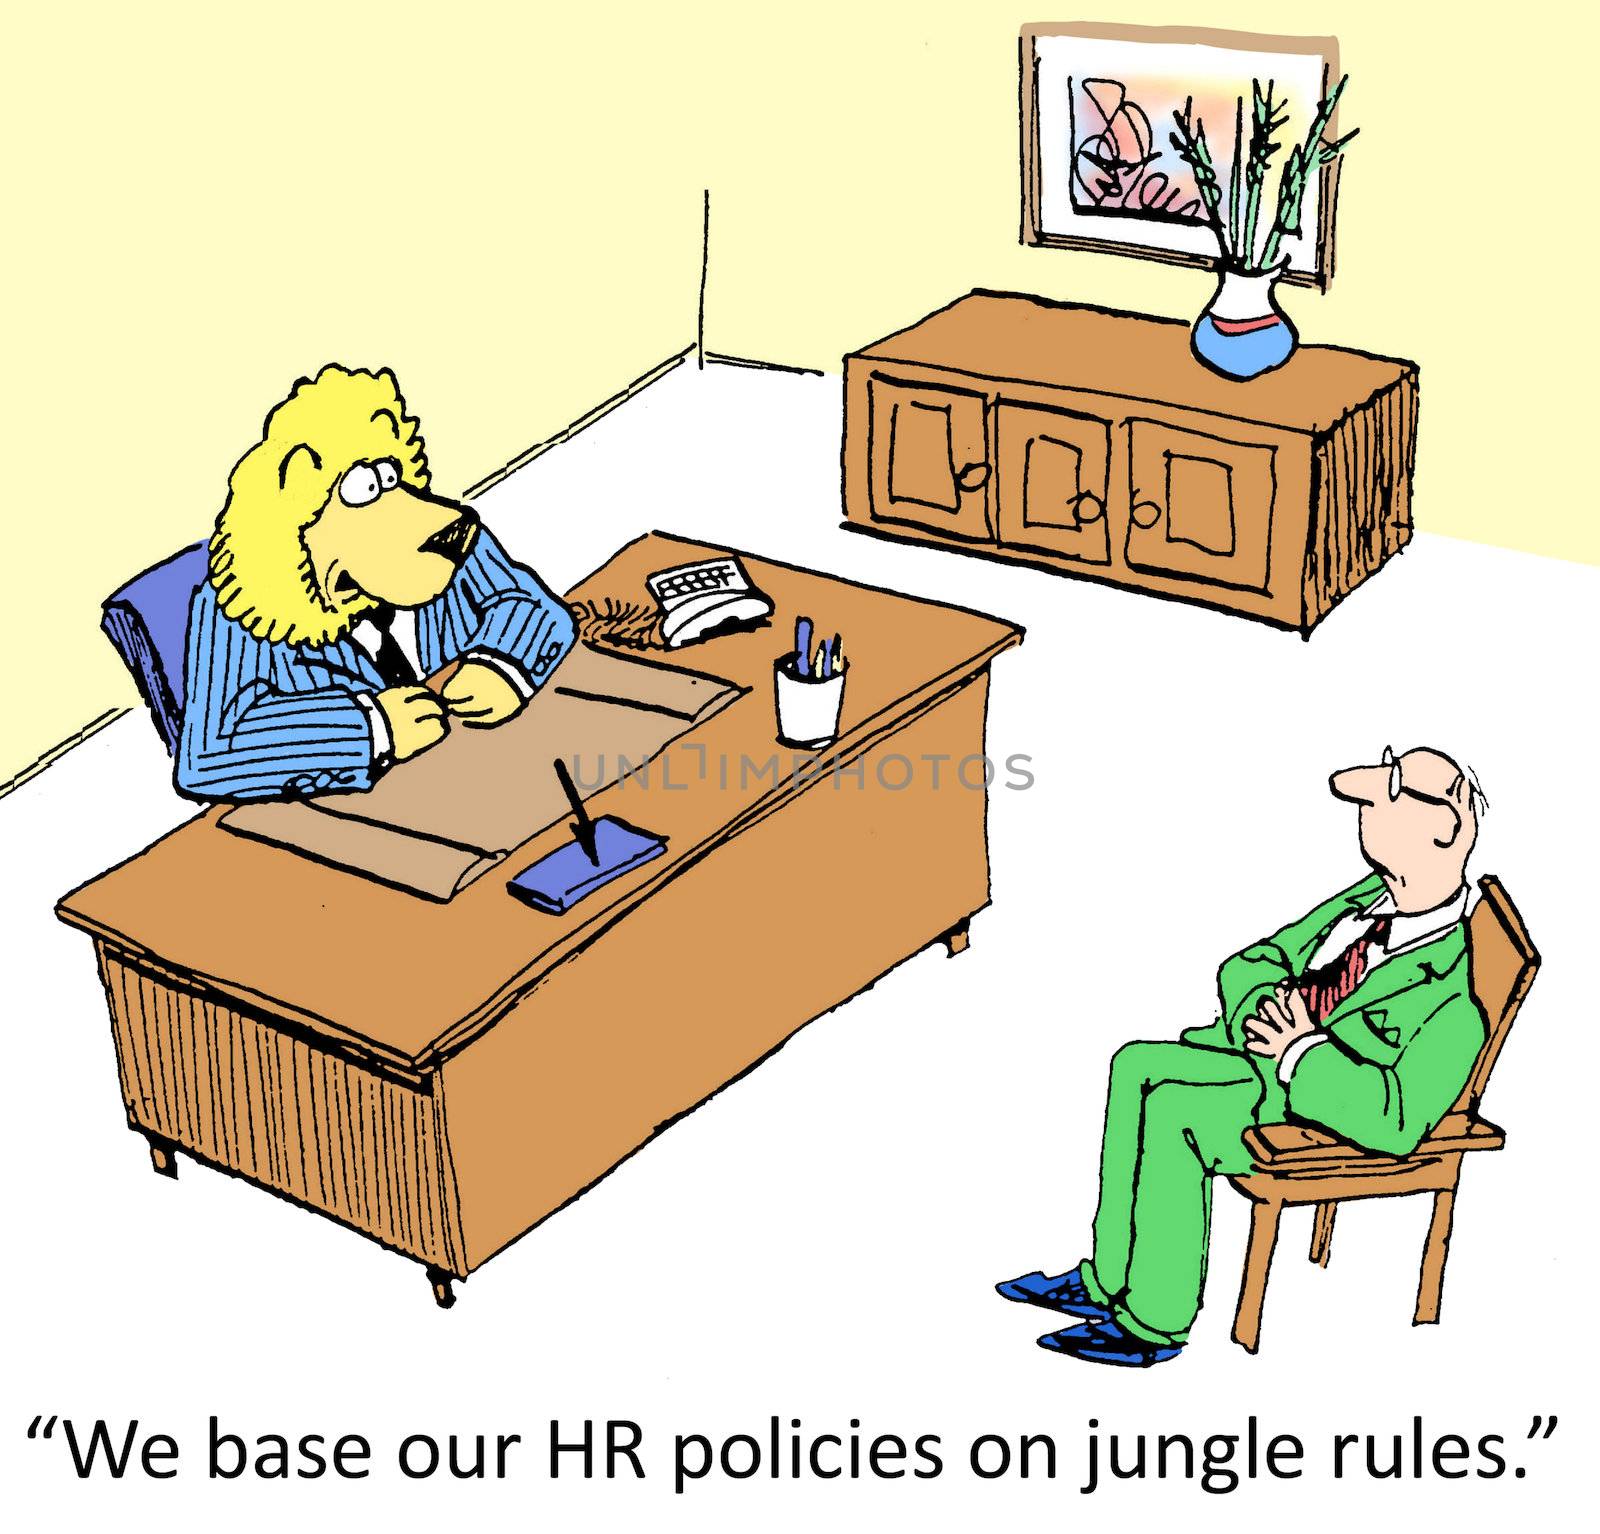 "We base our HR policies on jungle rules."